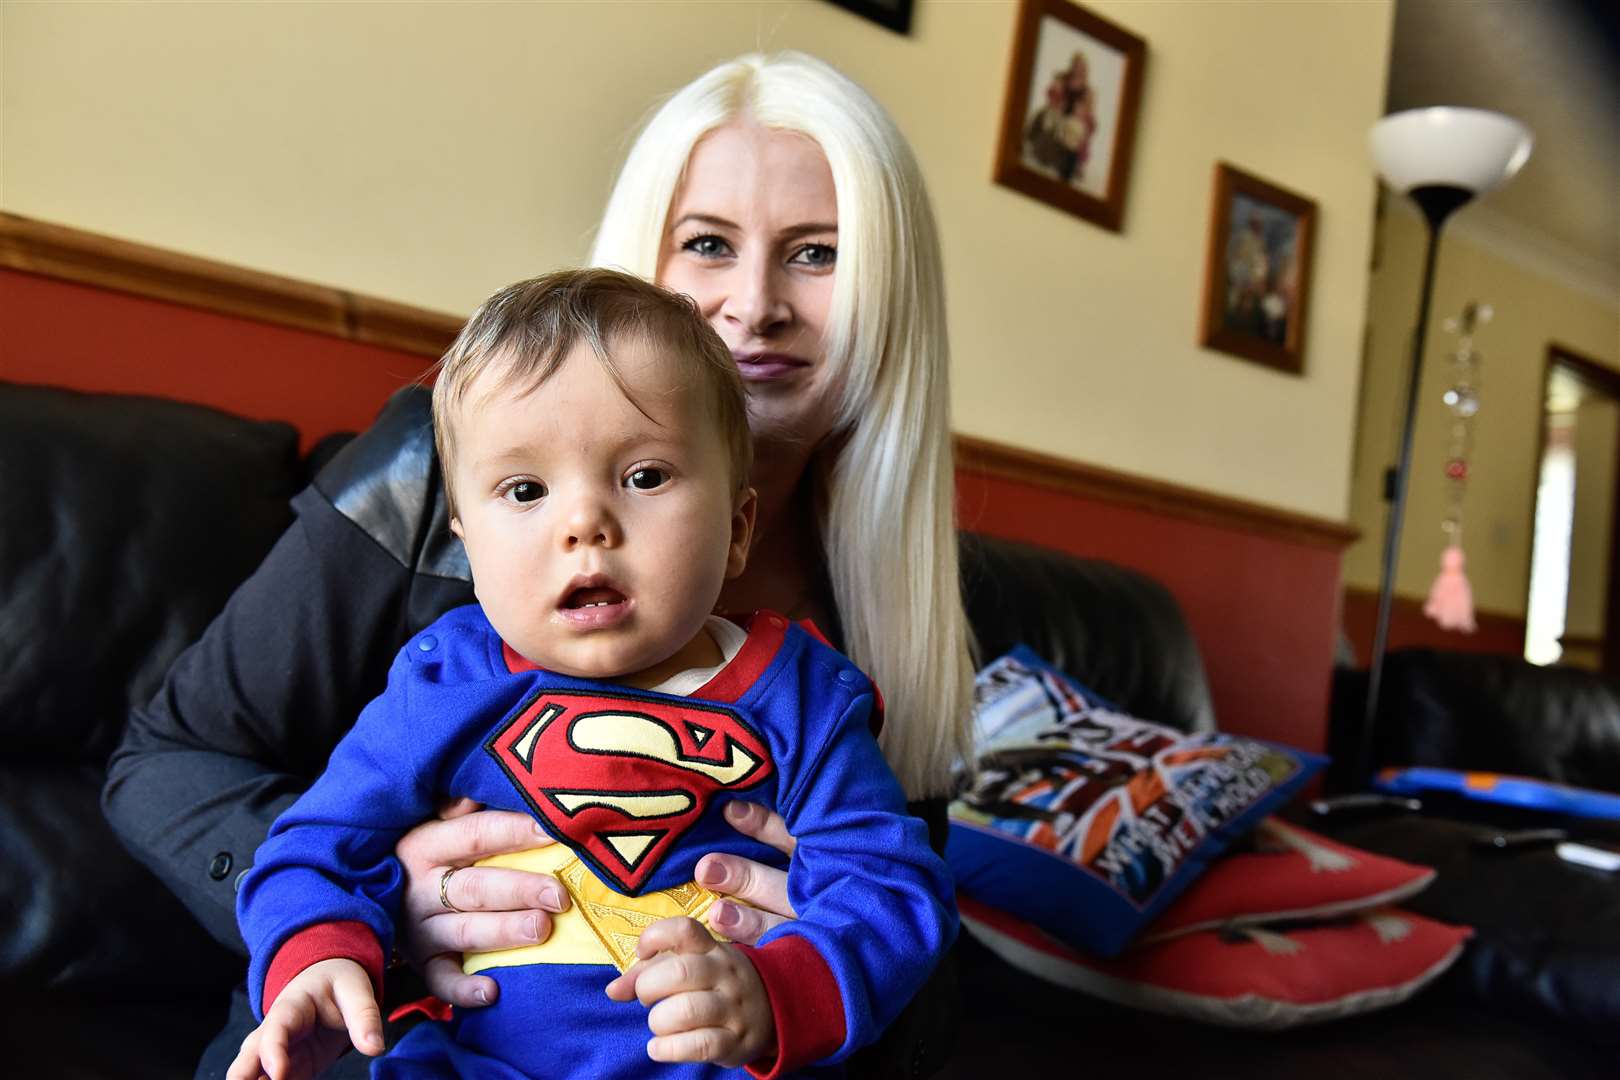 Deal boy who was born with Hypoplastic Right Heart Syndrome